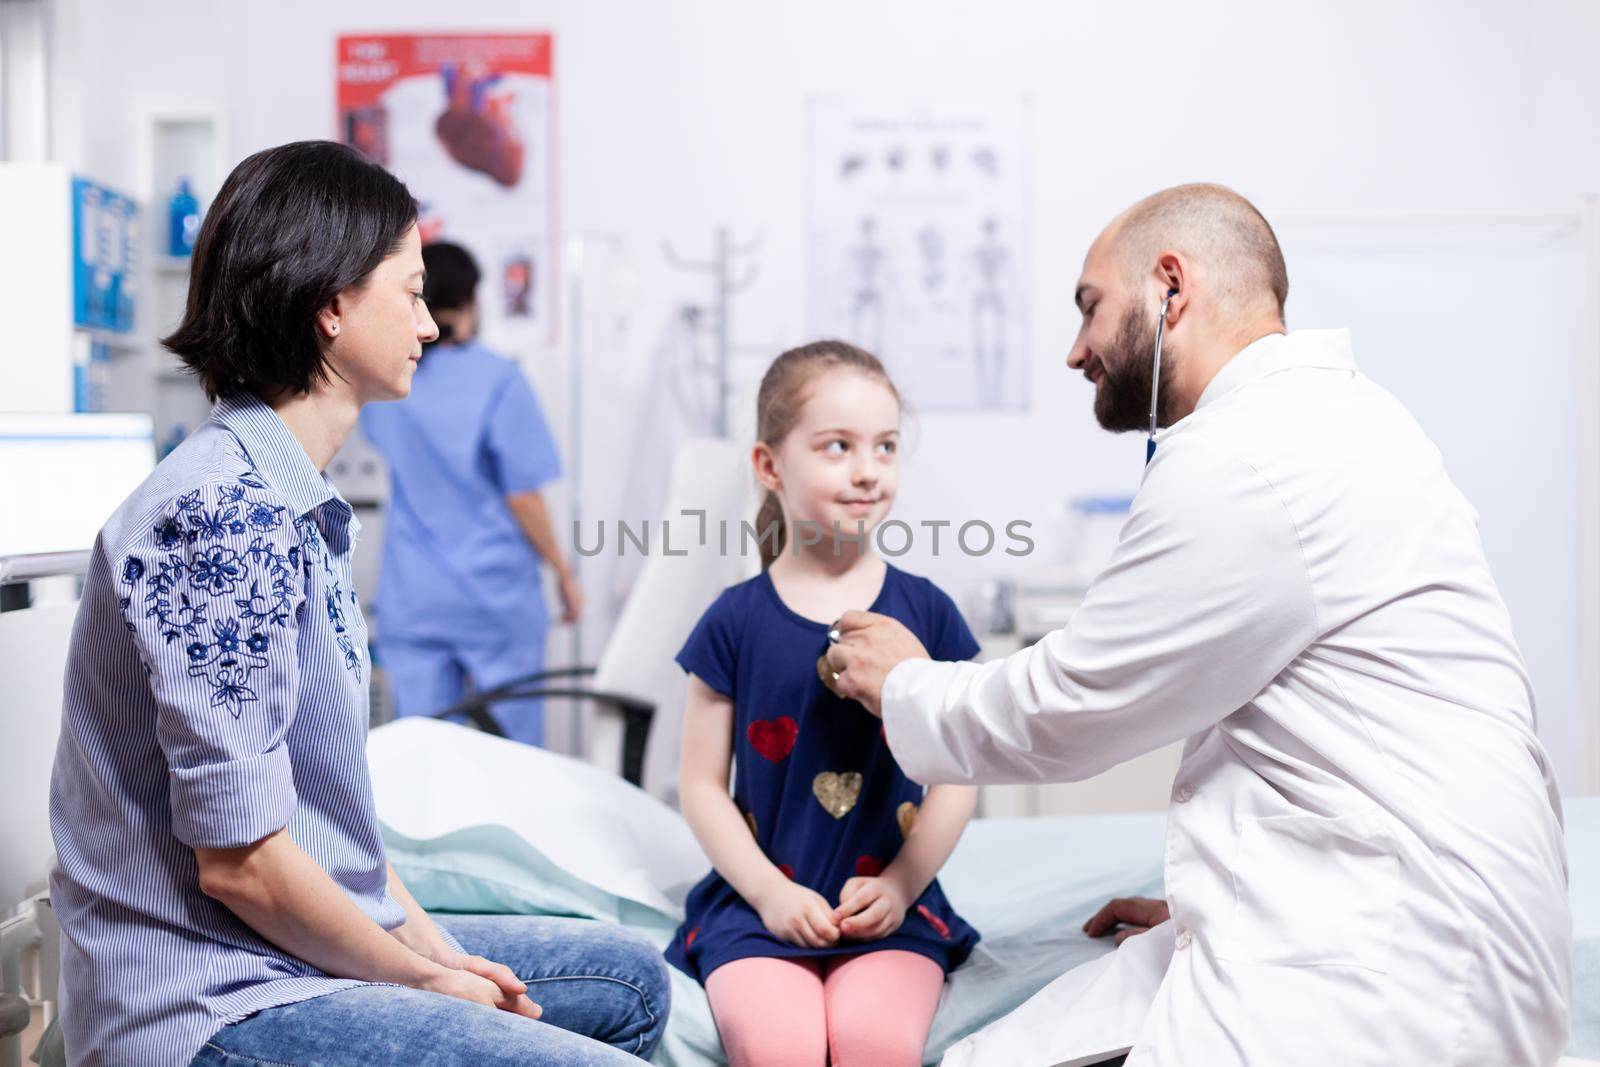 Pediatrician checking health of child using stethoscope in hospital office during consultation. Healthcare physician specialist in medicine providing health care services treatment examination.